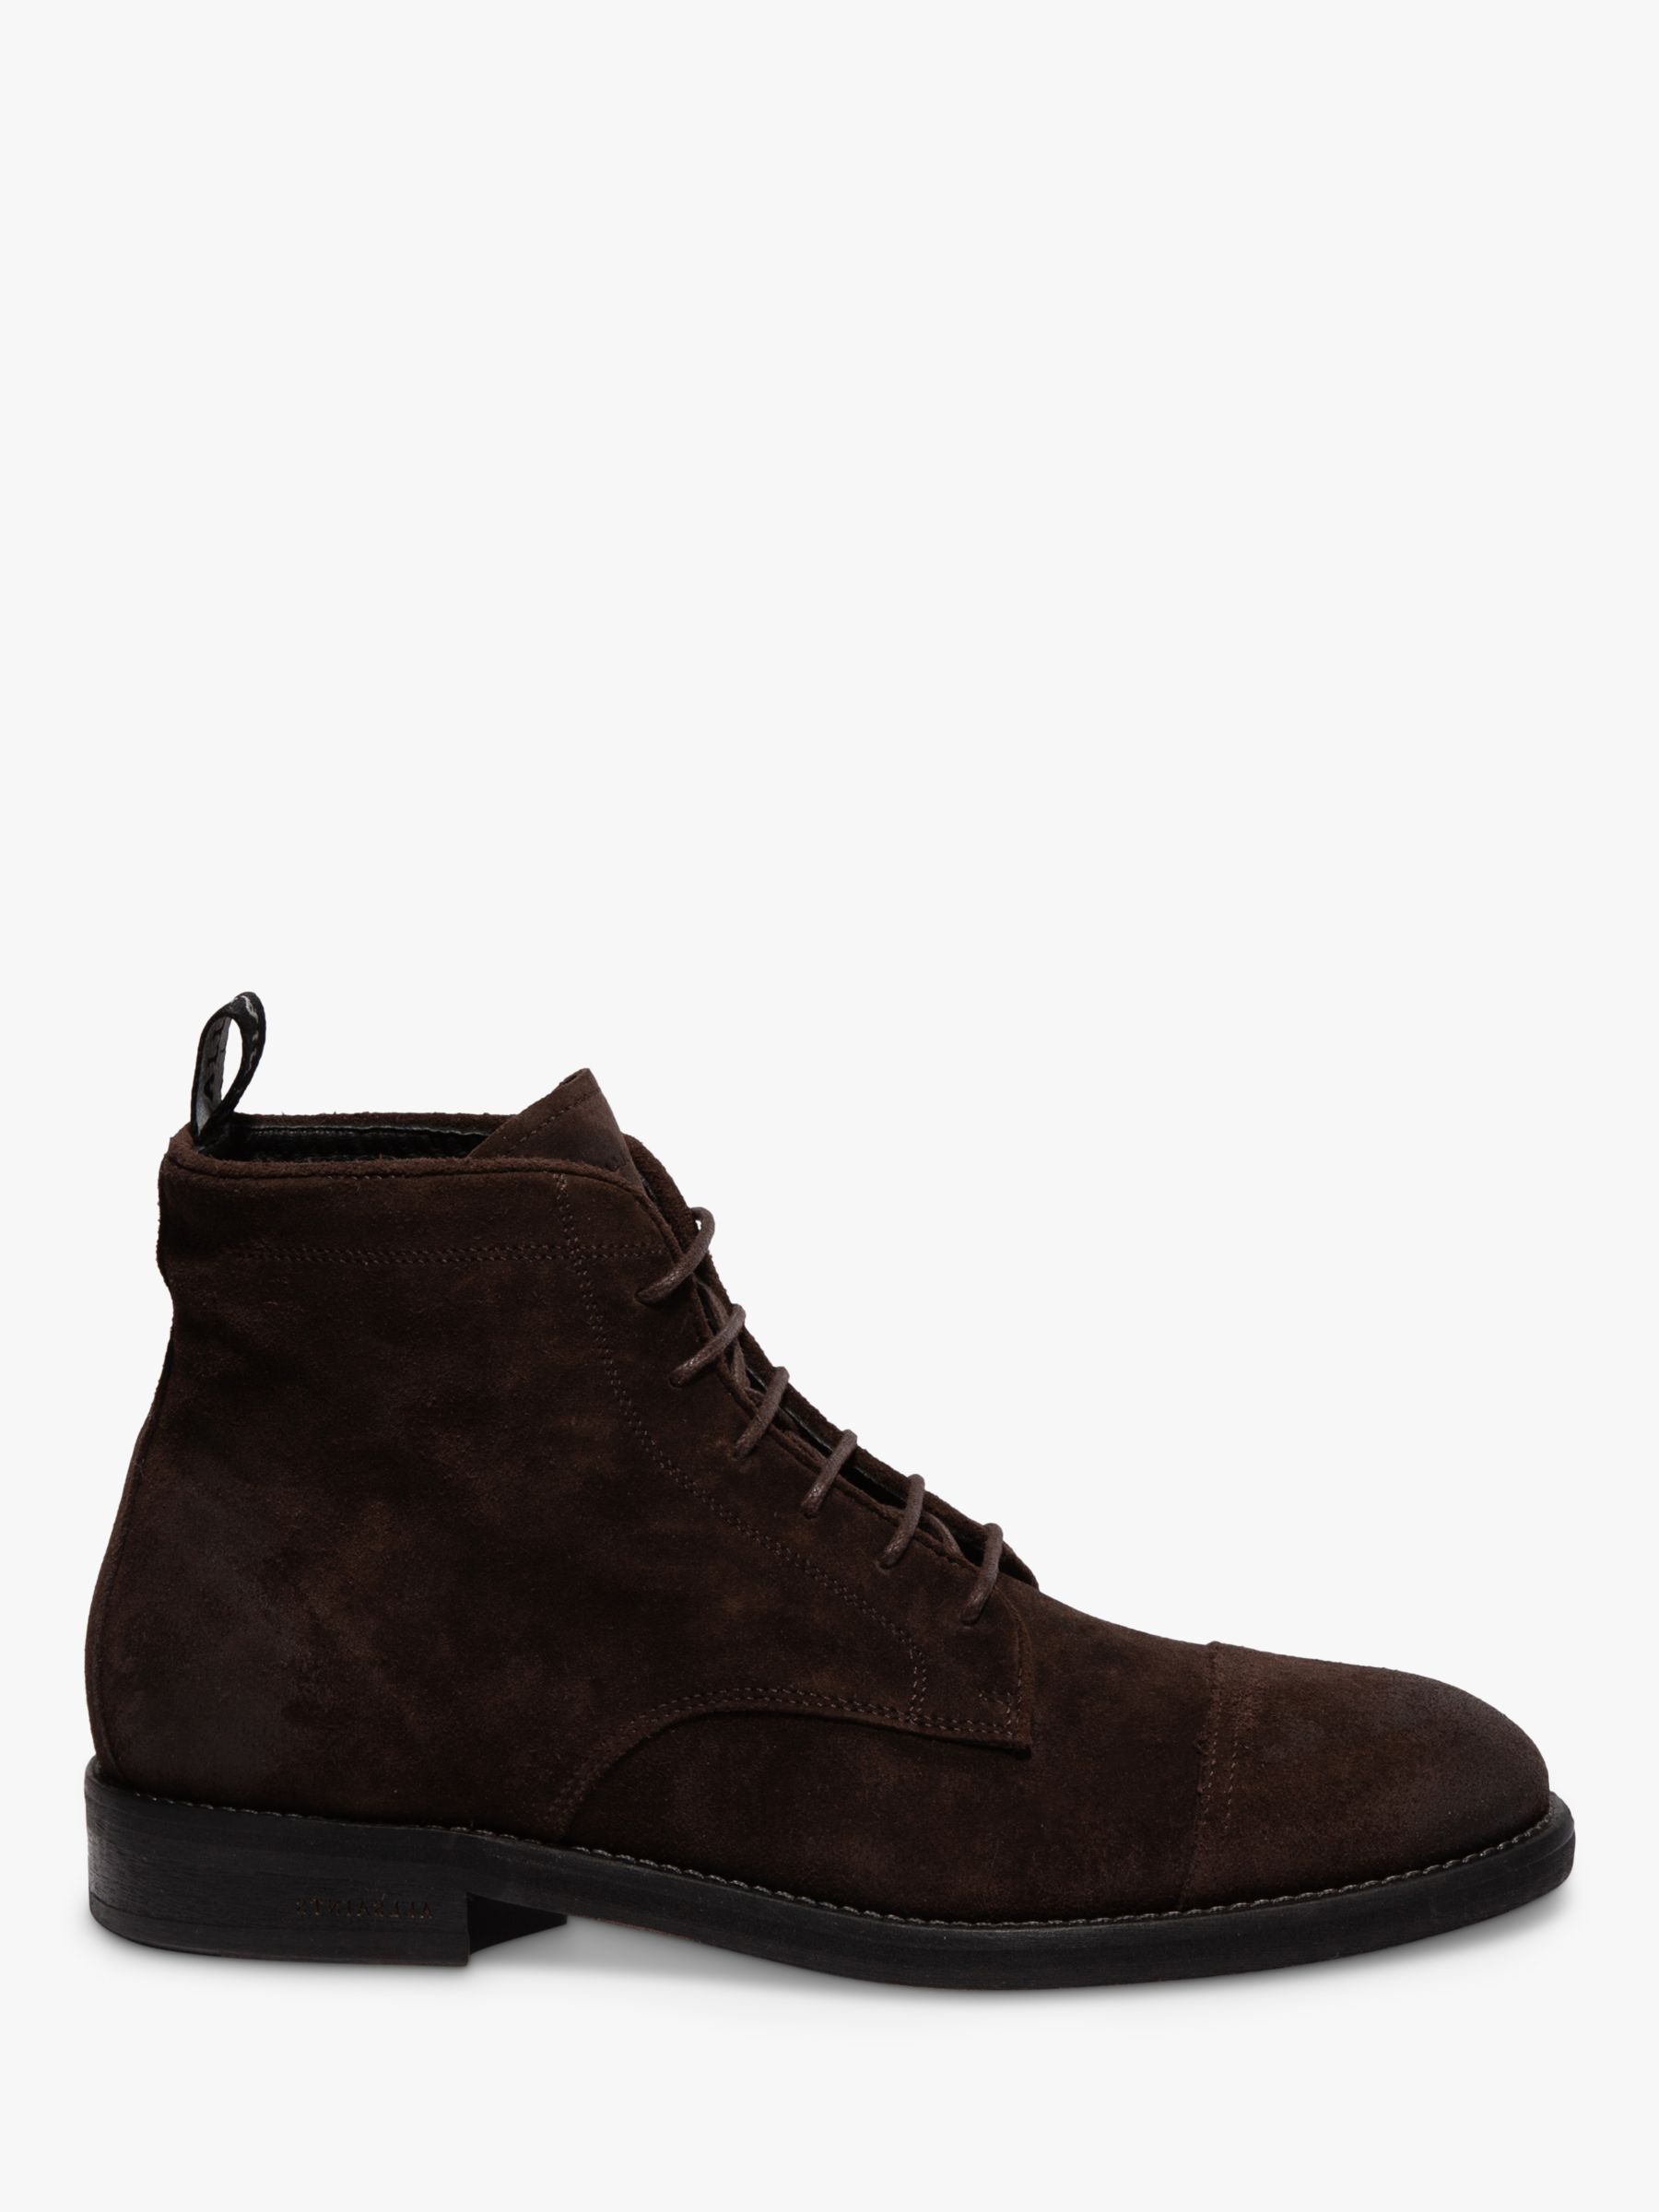 AllSaints Harland Suede Desert Boots, Bitter Chocolate at John Lewis ...